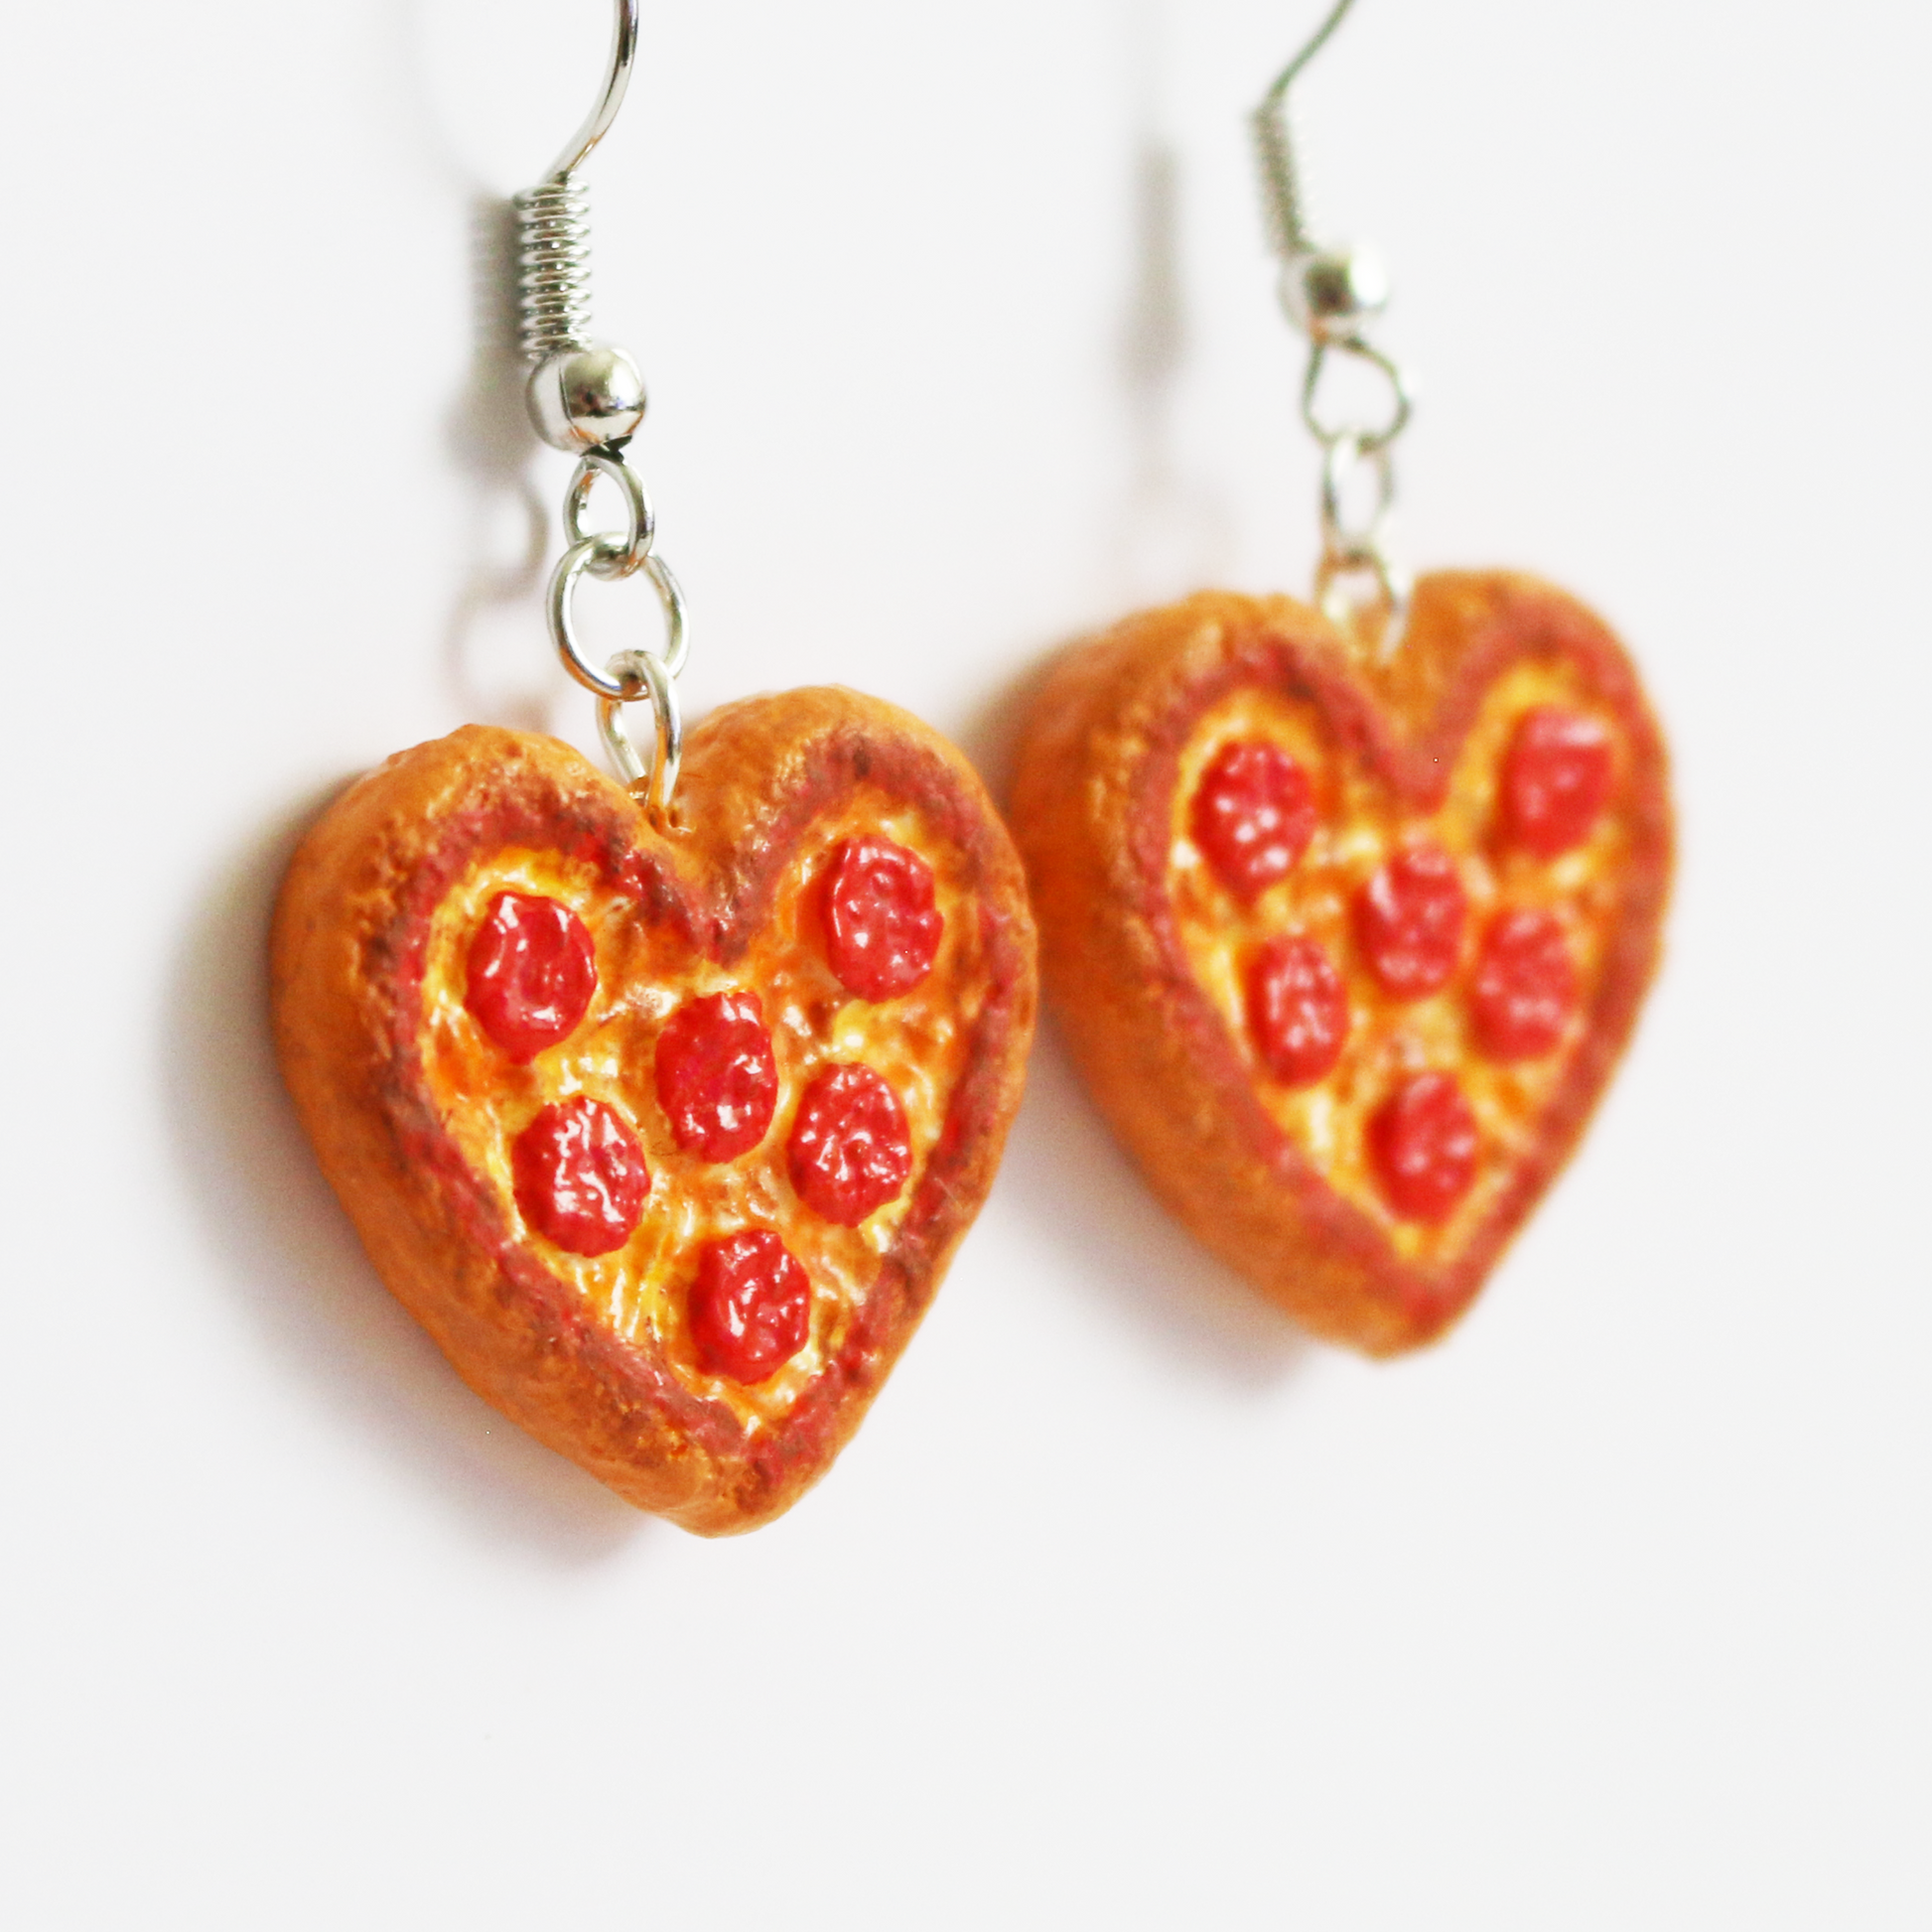 Pepperoni Pizza Earrings | Miniature Realistic Looking | Food Jewelry | Heart Shaped | S'Berry Boutique